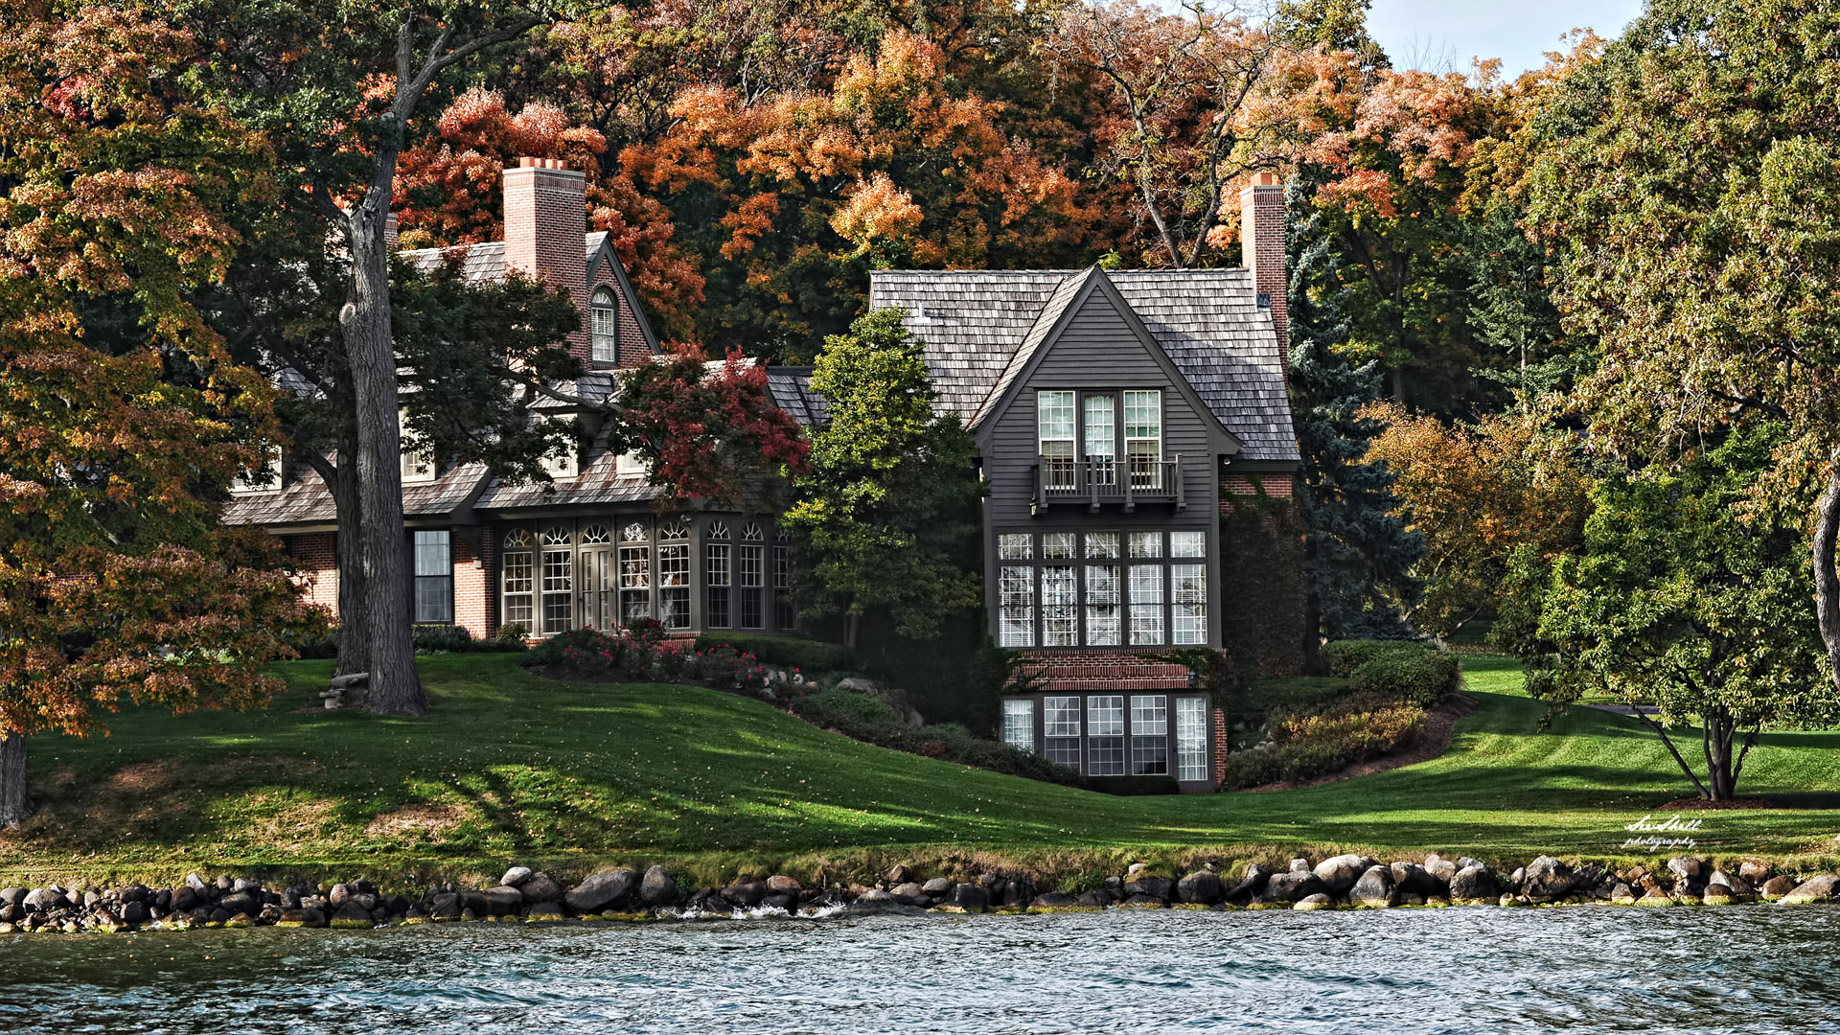 Wrigley Estate Lake Geneva - 5 of Wisconsin’s Historically Significant Grand Mansions and Premier Luxury Estates